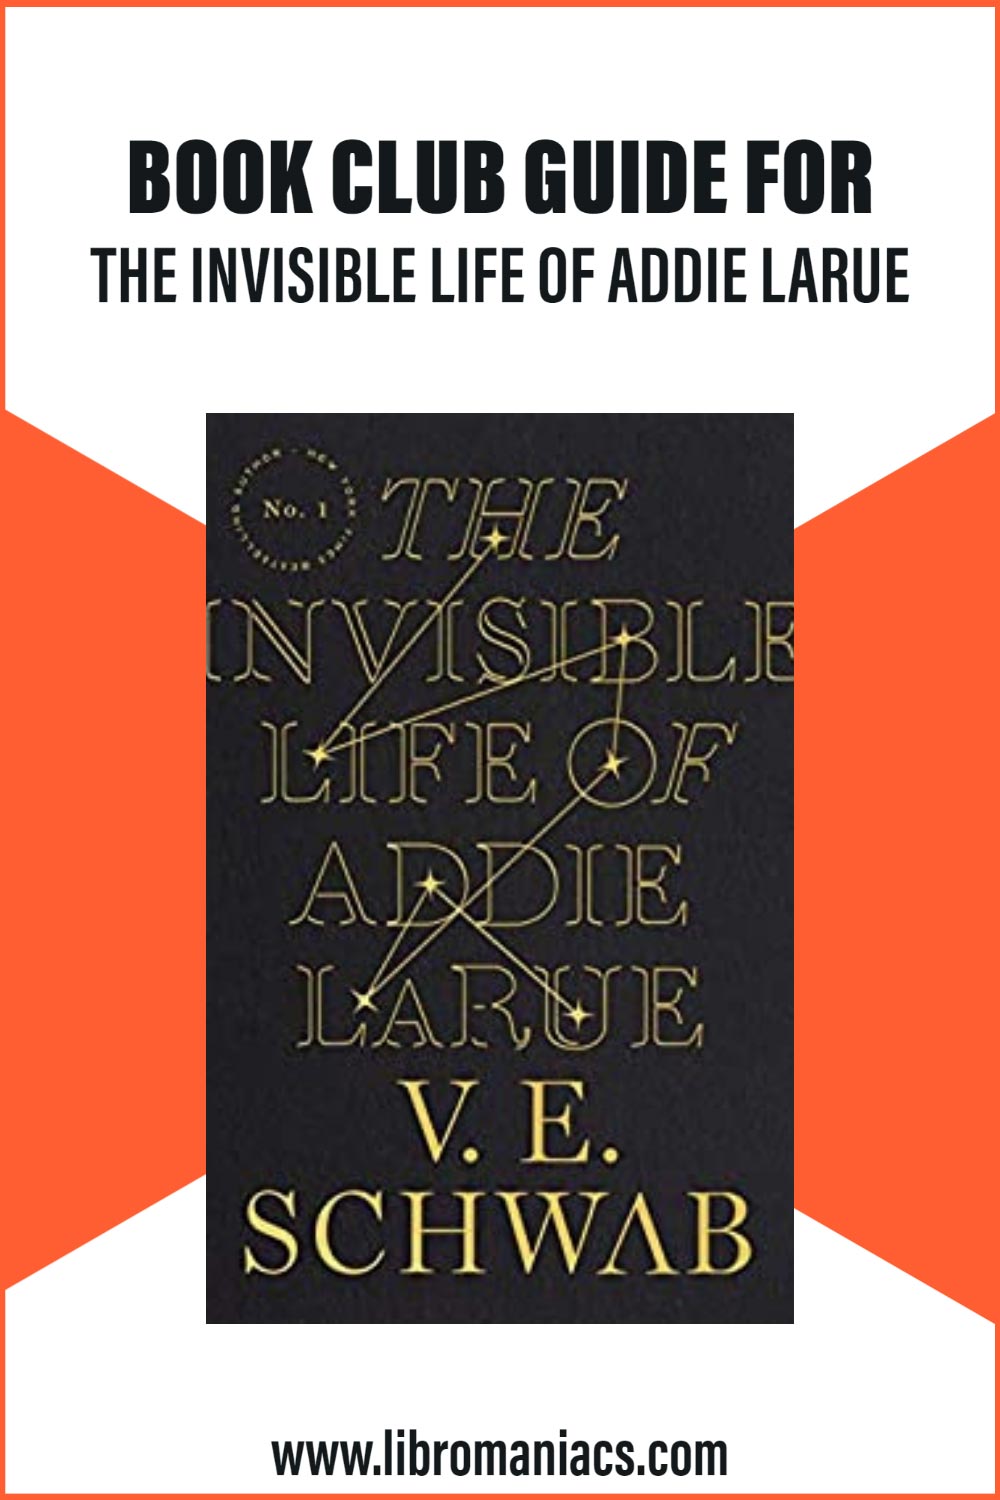 Book Club guide for the Invisible Life of Addie LaRue